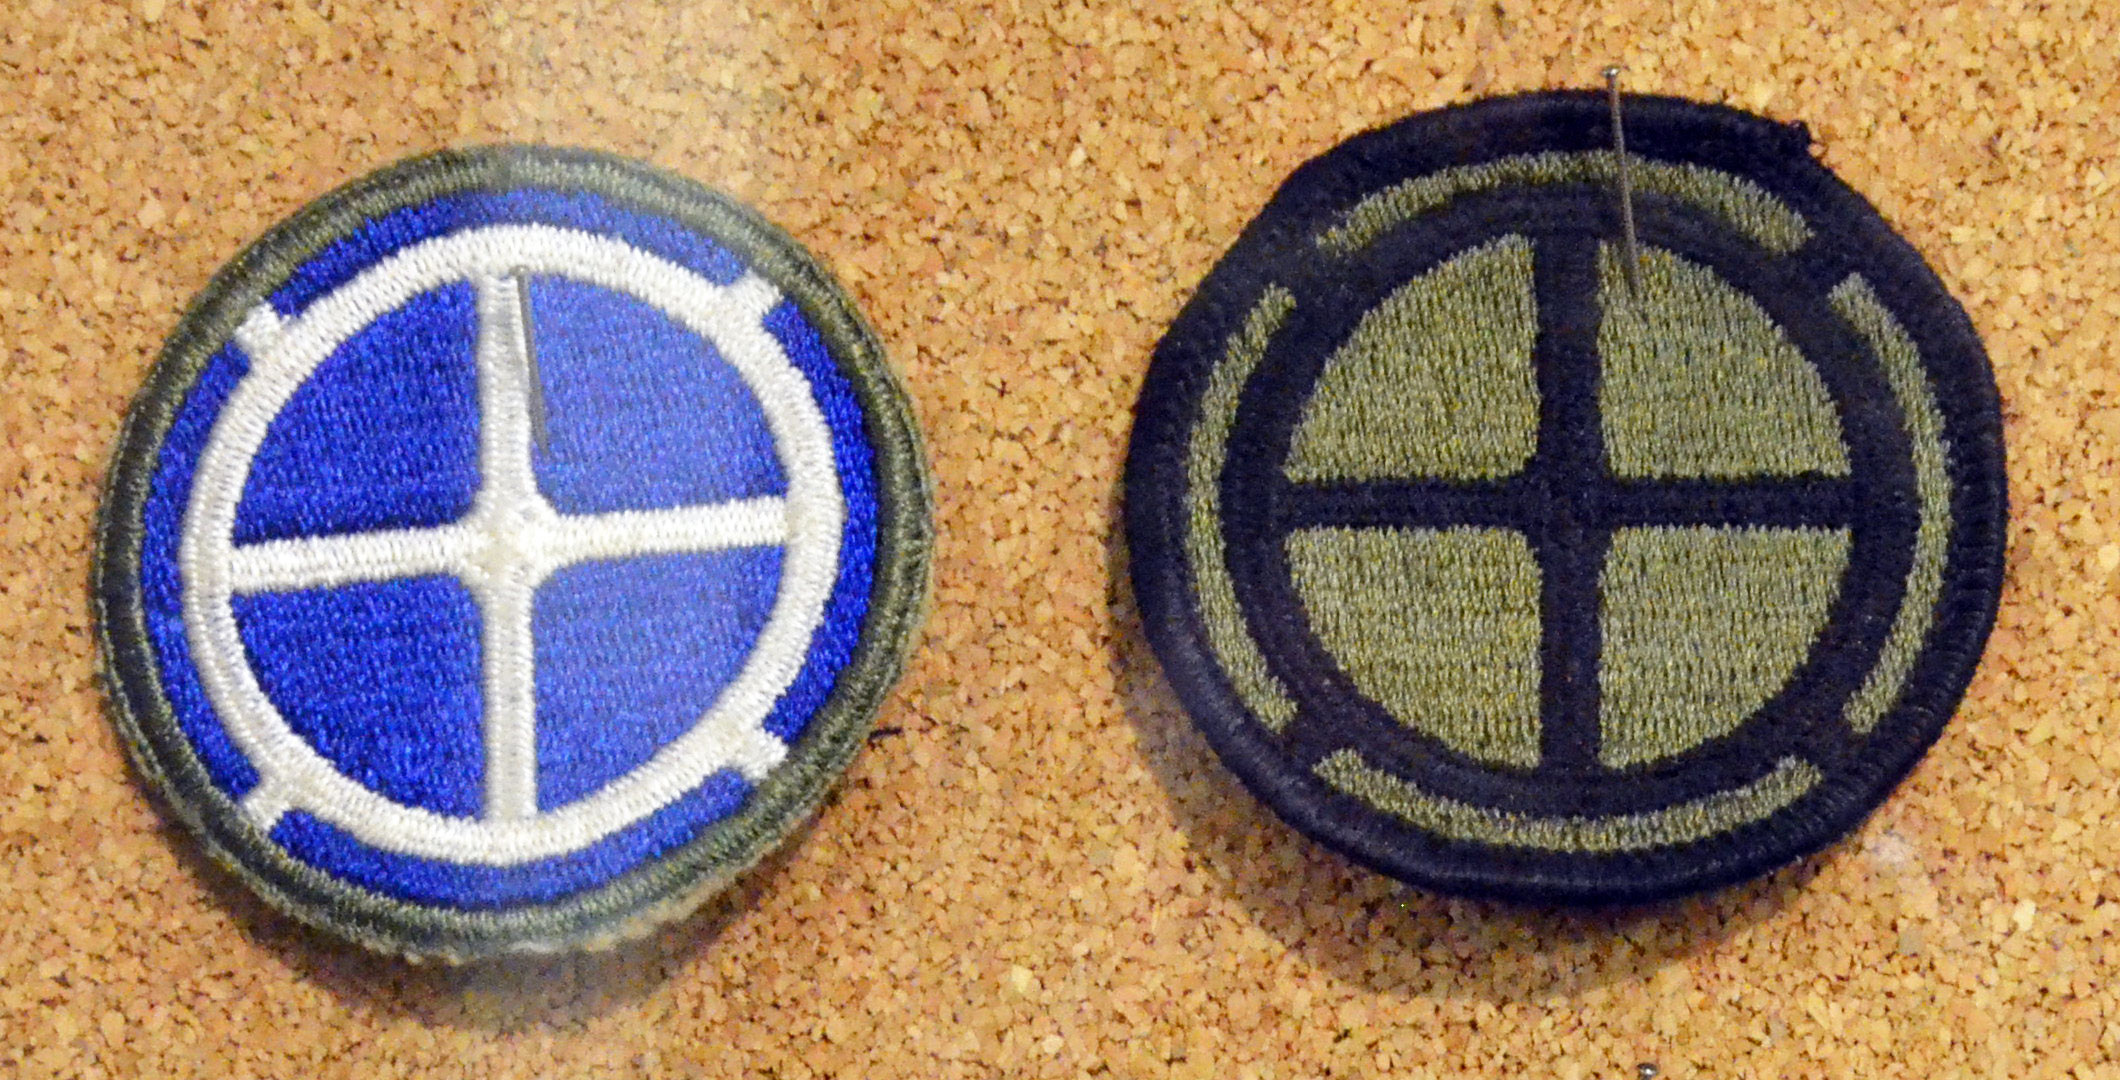 The patches of the 35th Infantry Division are on display at the division museum in Topeka, Kan.